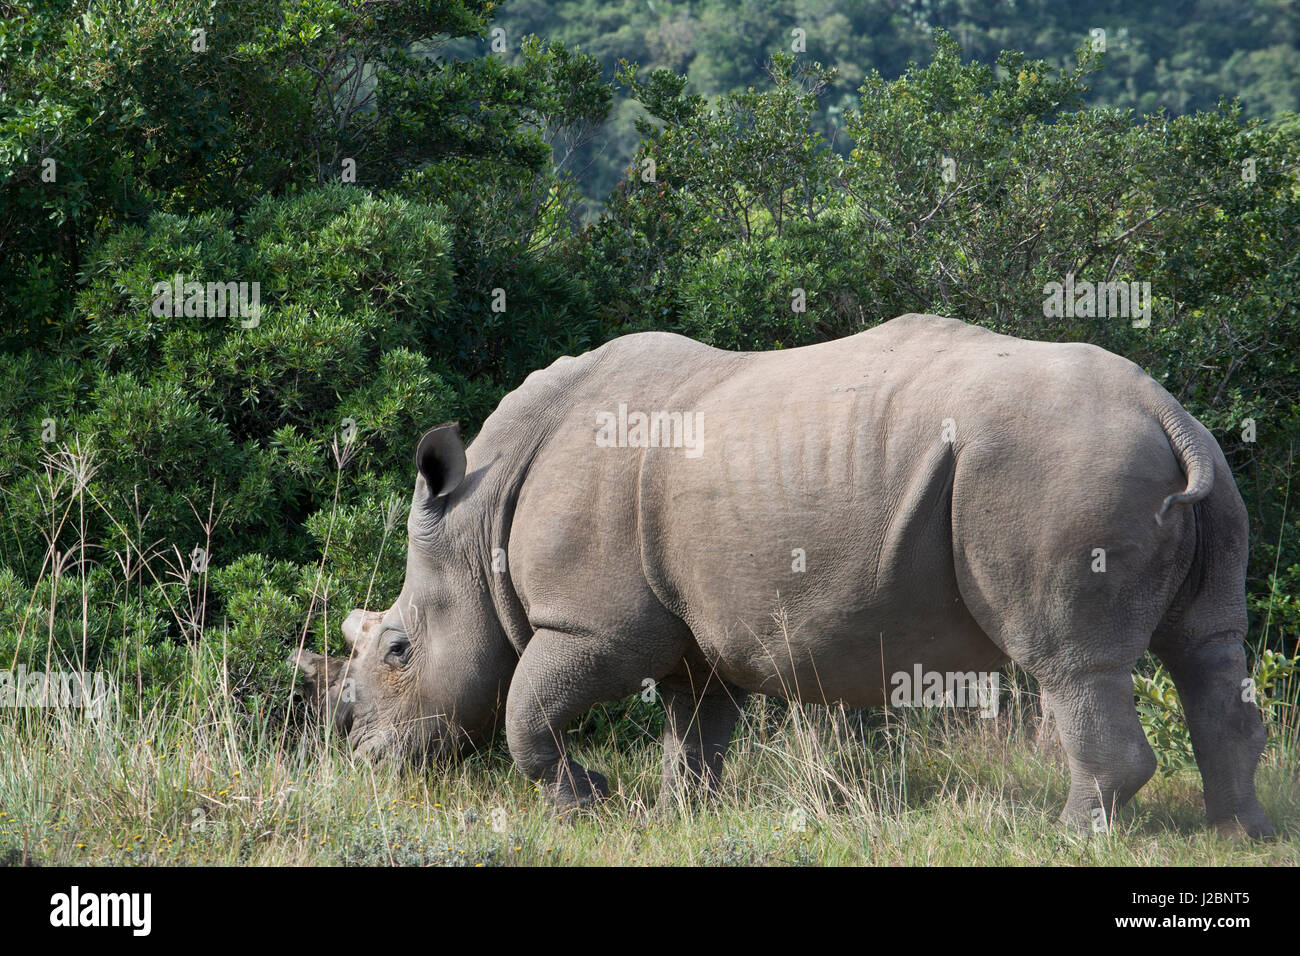 South Africa, Eastern Cape, East London. Inkwenkwezi Game Reserve. White rhinoceros (Wild, Ceratotherium simum) Horns have been 'tipped' or cut off to discourage poachers. Stock Photo